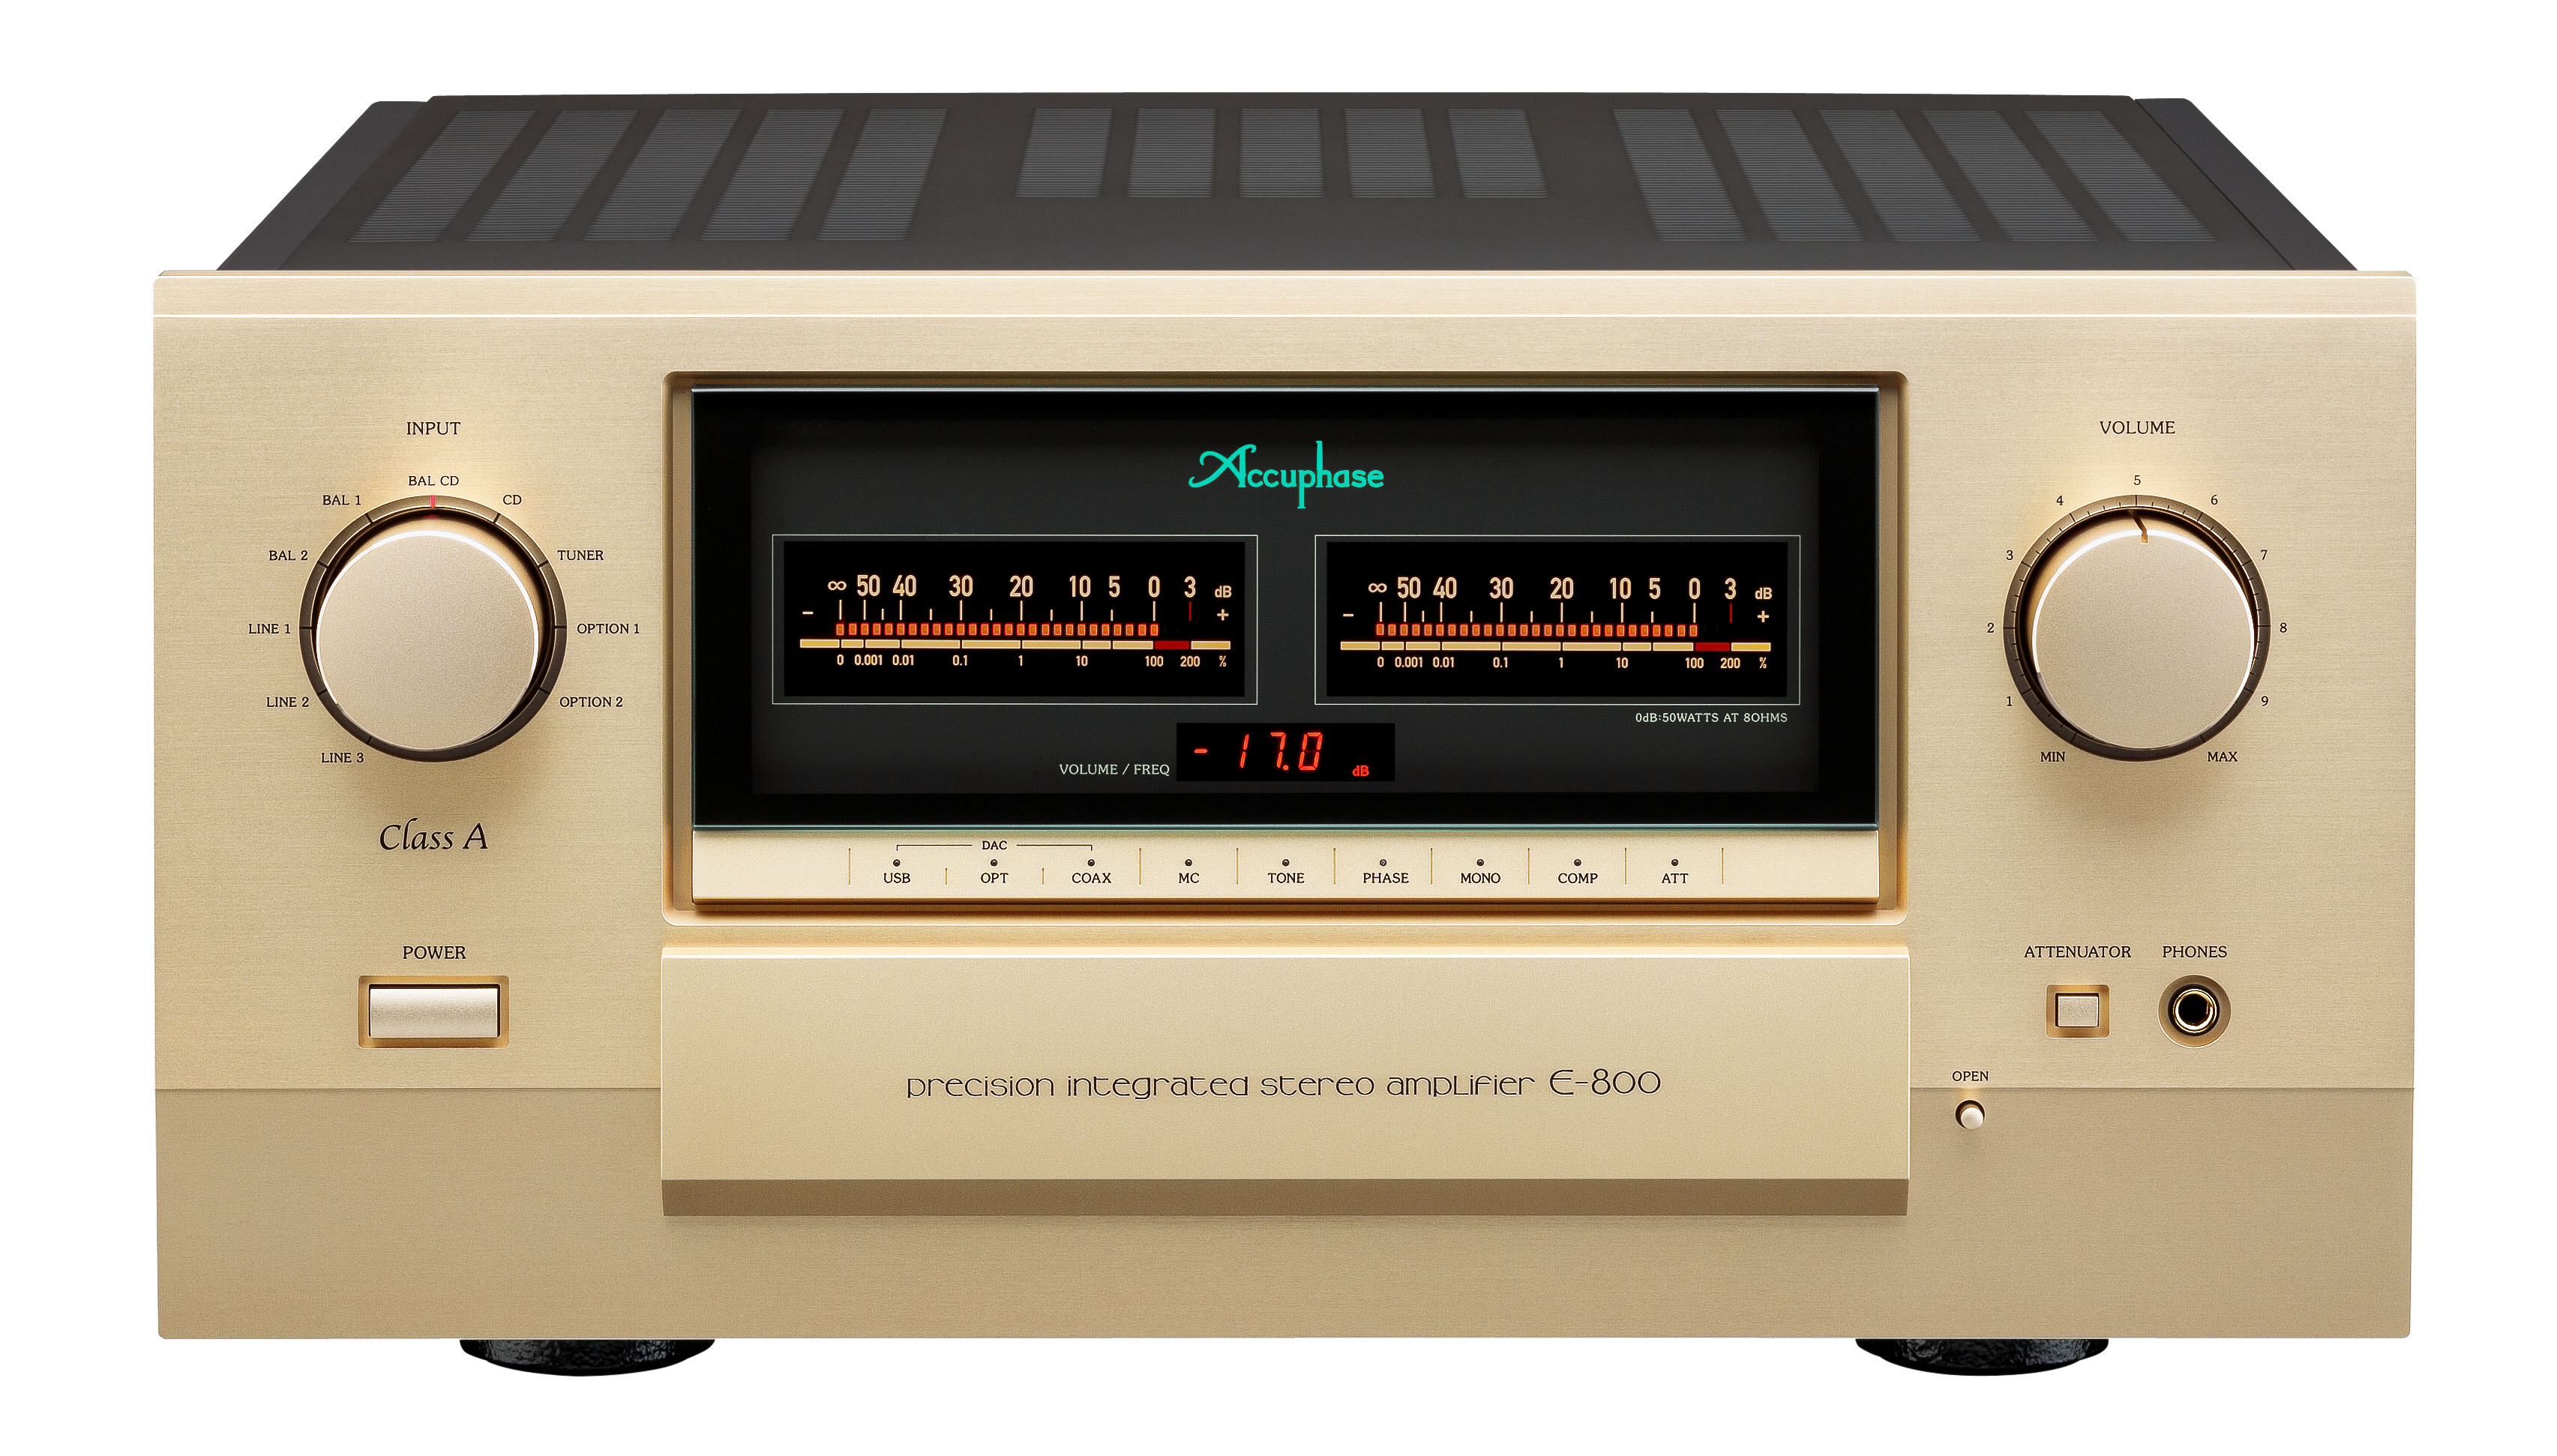 Accuphase E-800 (80)